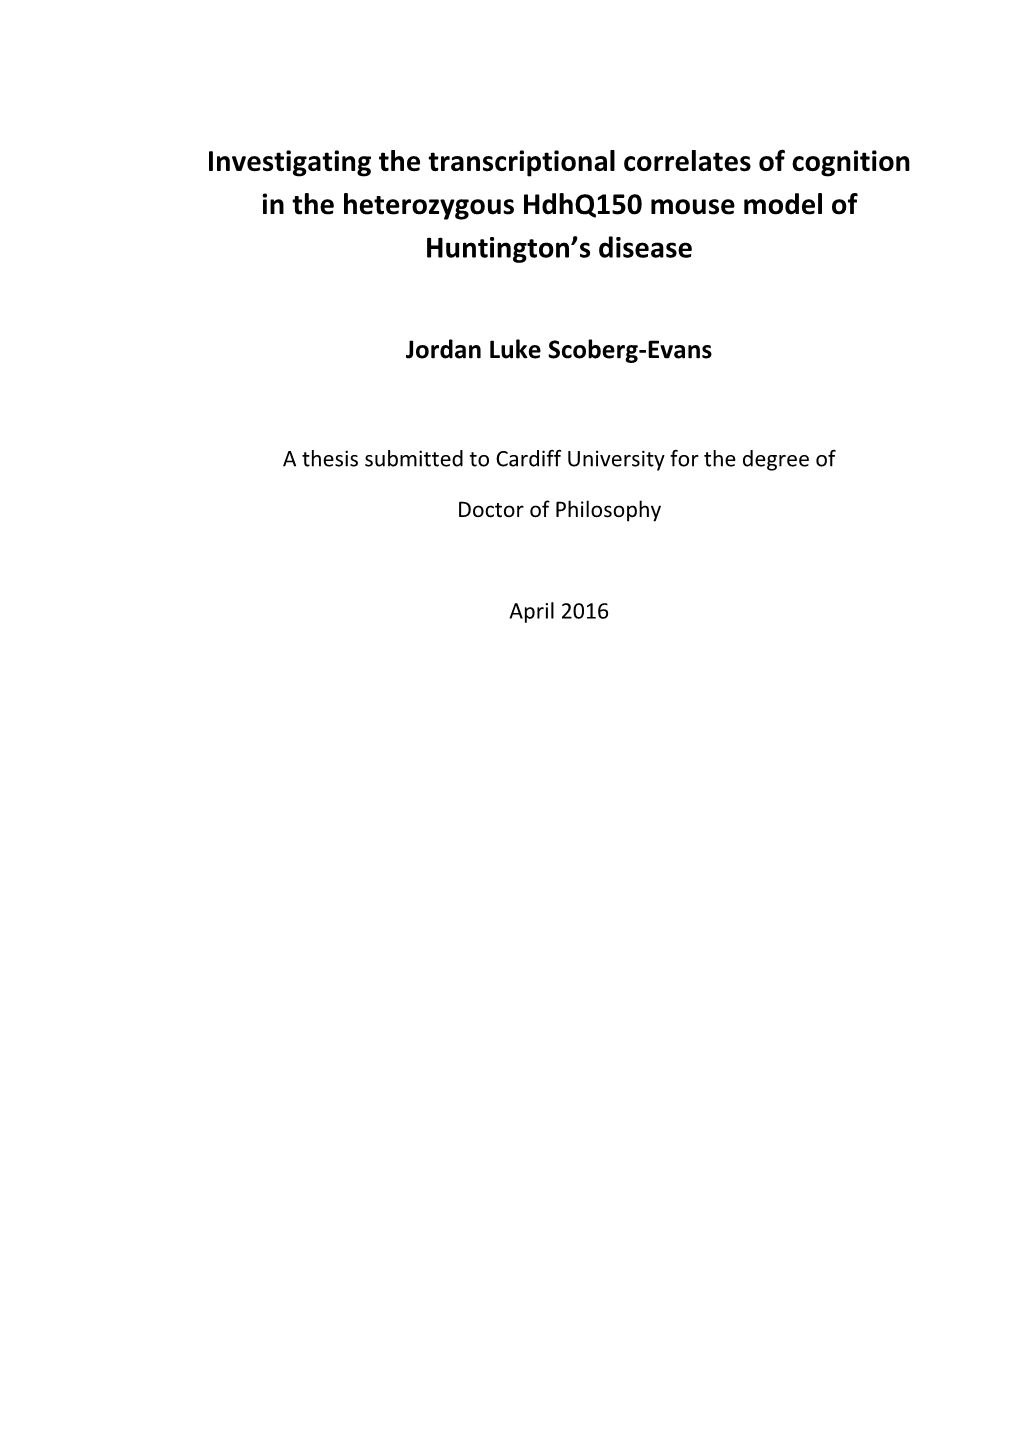 Investigating the Transcriptional Correlates of Cognition in the Heterozygous Hdhq150 Mouse Model of Huntington’S Disease